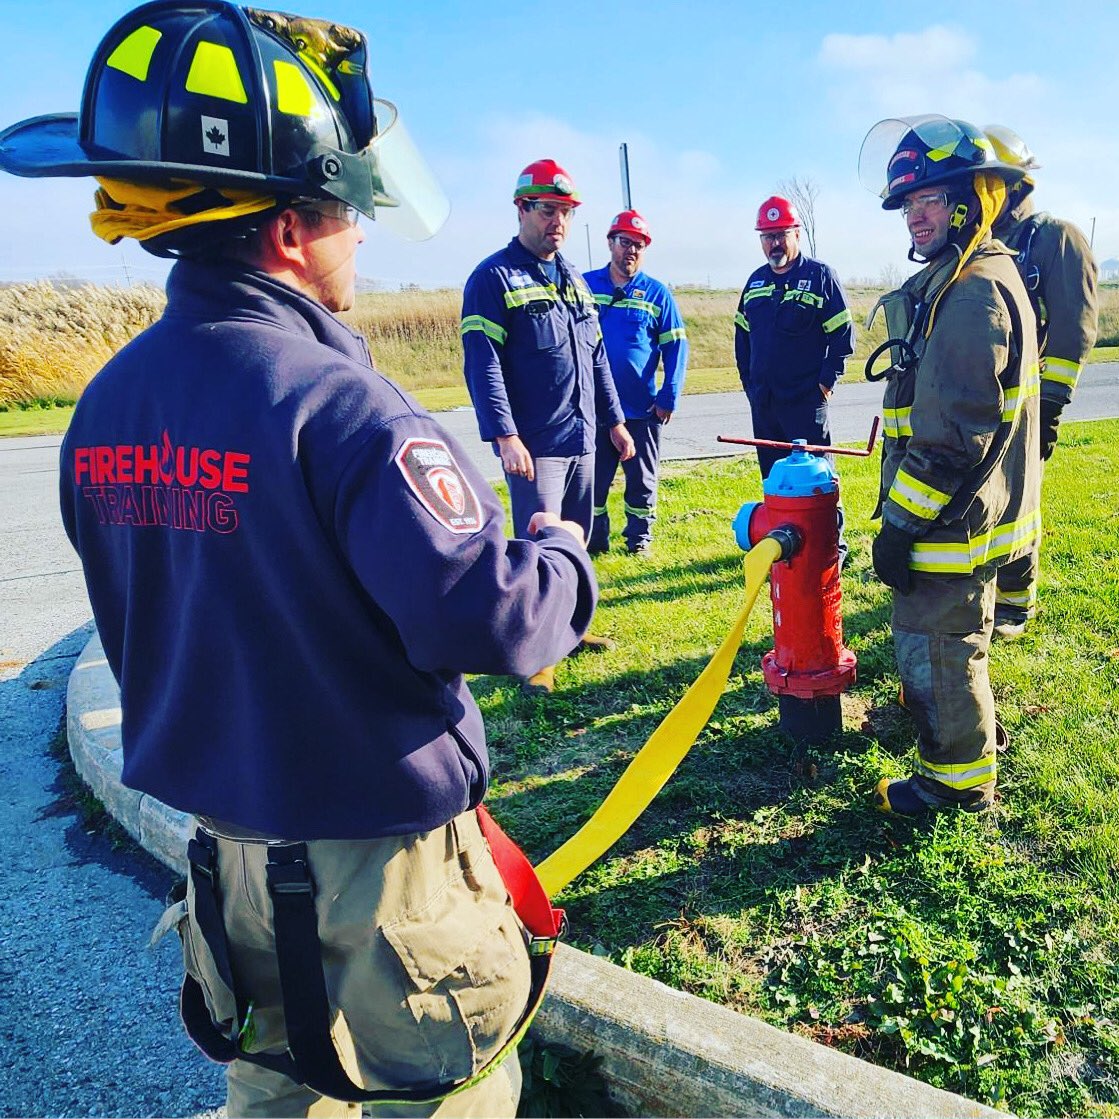 We had an incredible day conducting industrial fire response training for some of our clients in Eastern Ontario!🔥
#firehousetraining #workplacesafety #ertteam #firealarm #industrialworkplace #firesafetyplan #inspection #spillresponse